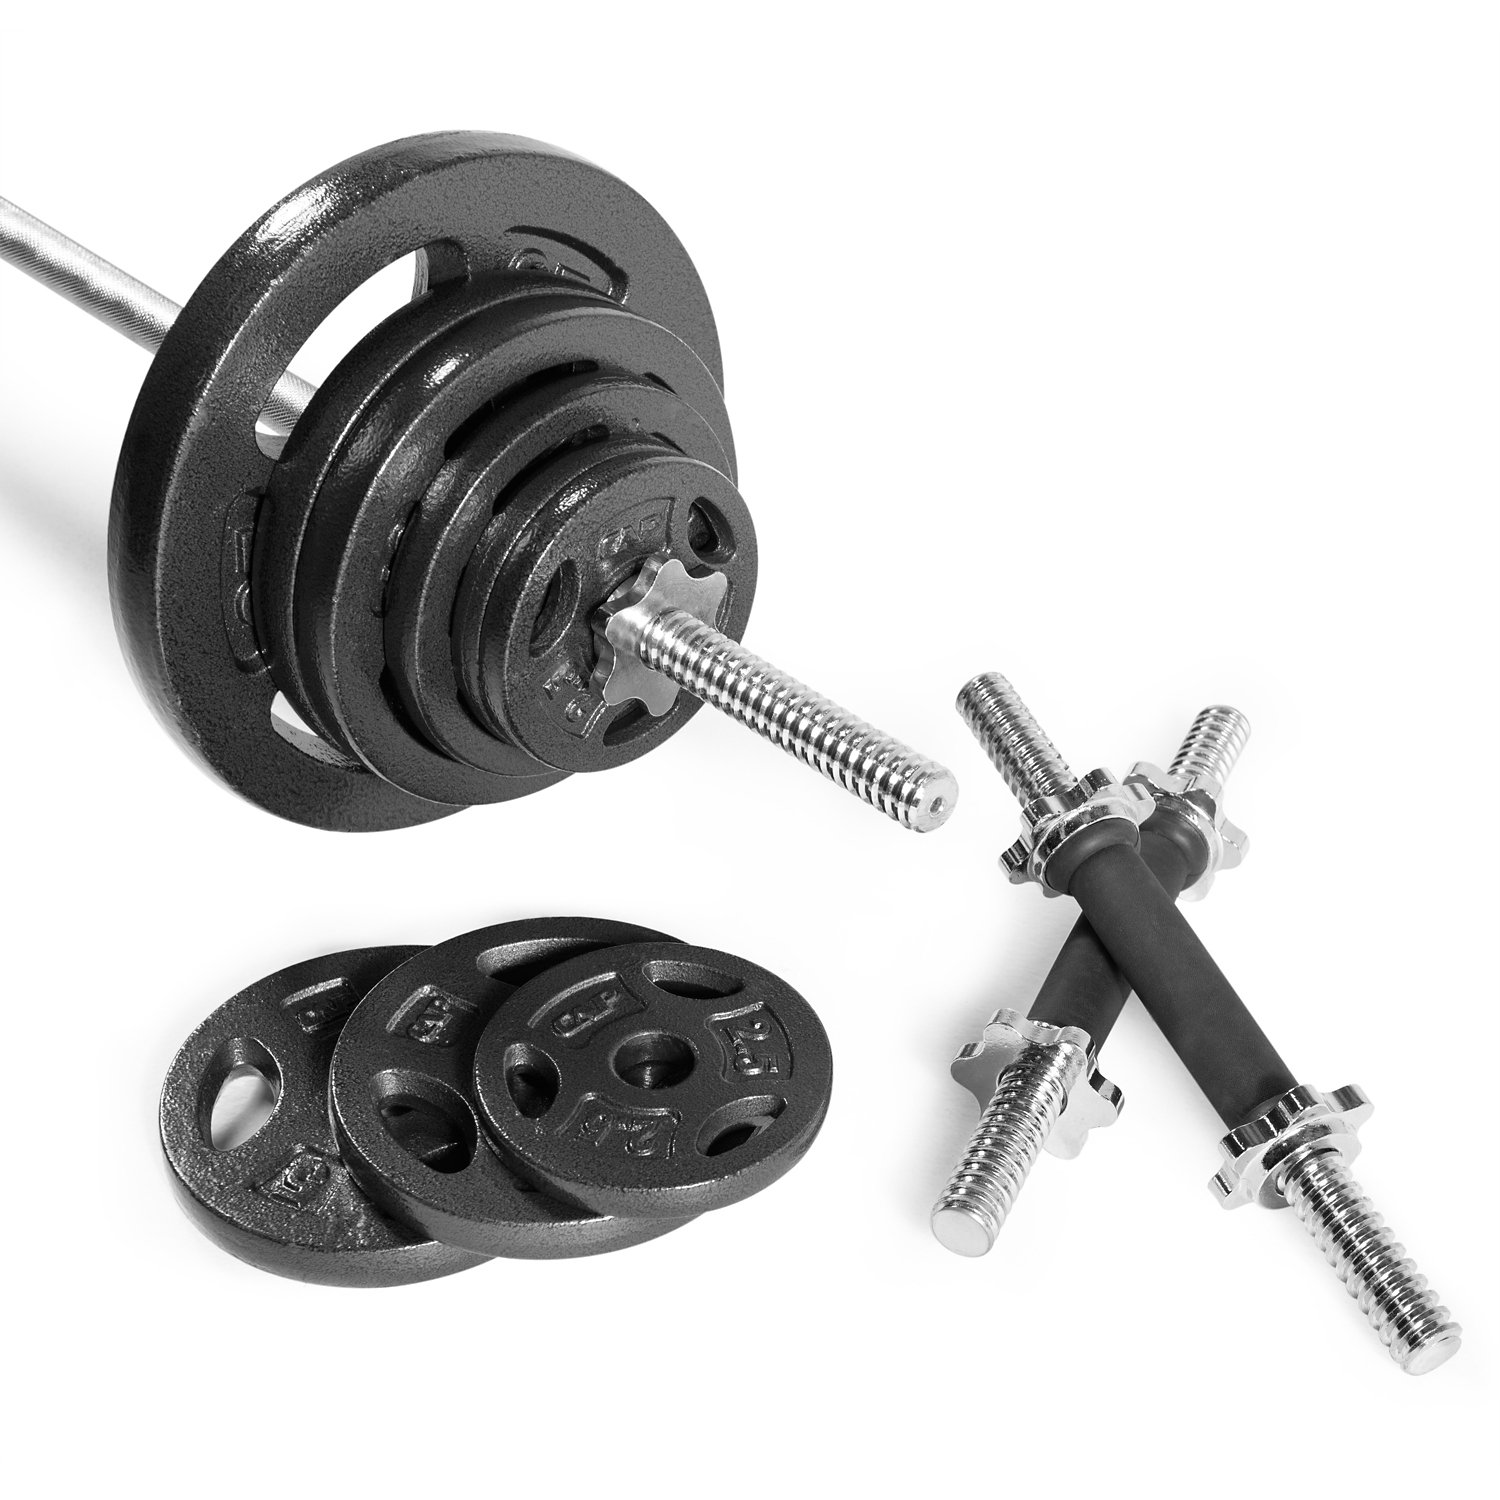 Dumbbell \u0026 Barbell Weight Sets | Academy